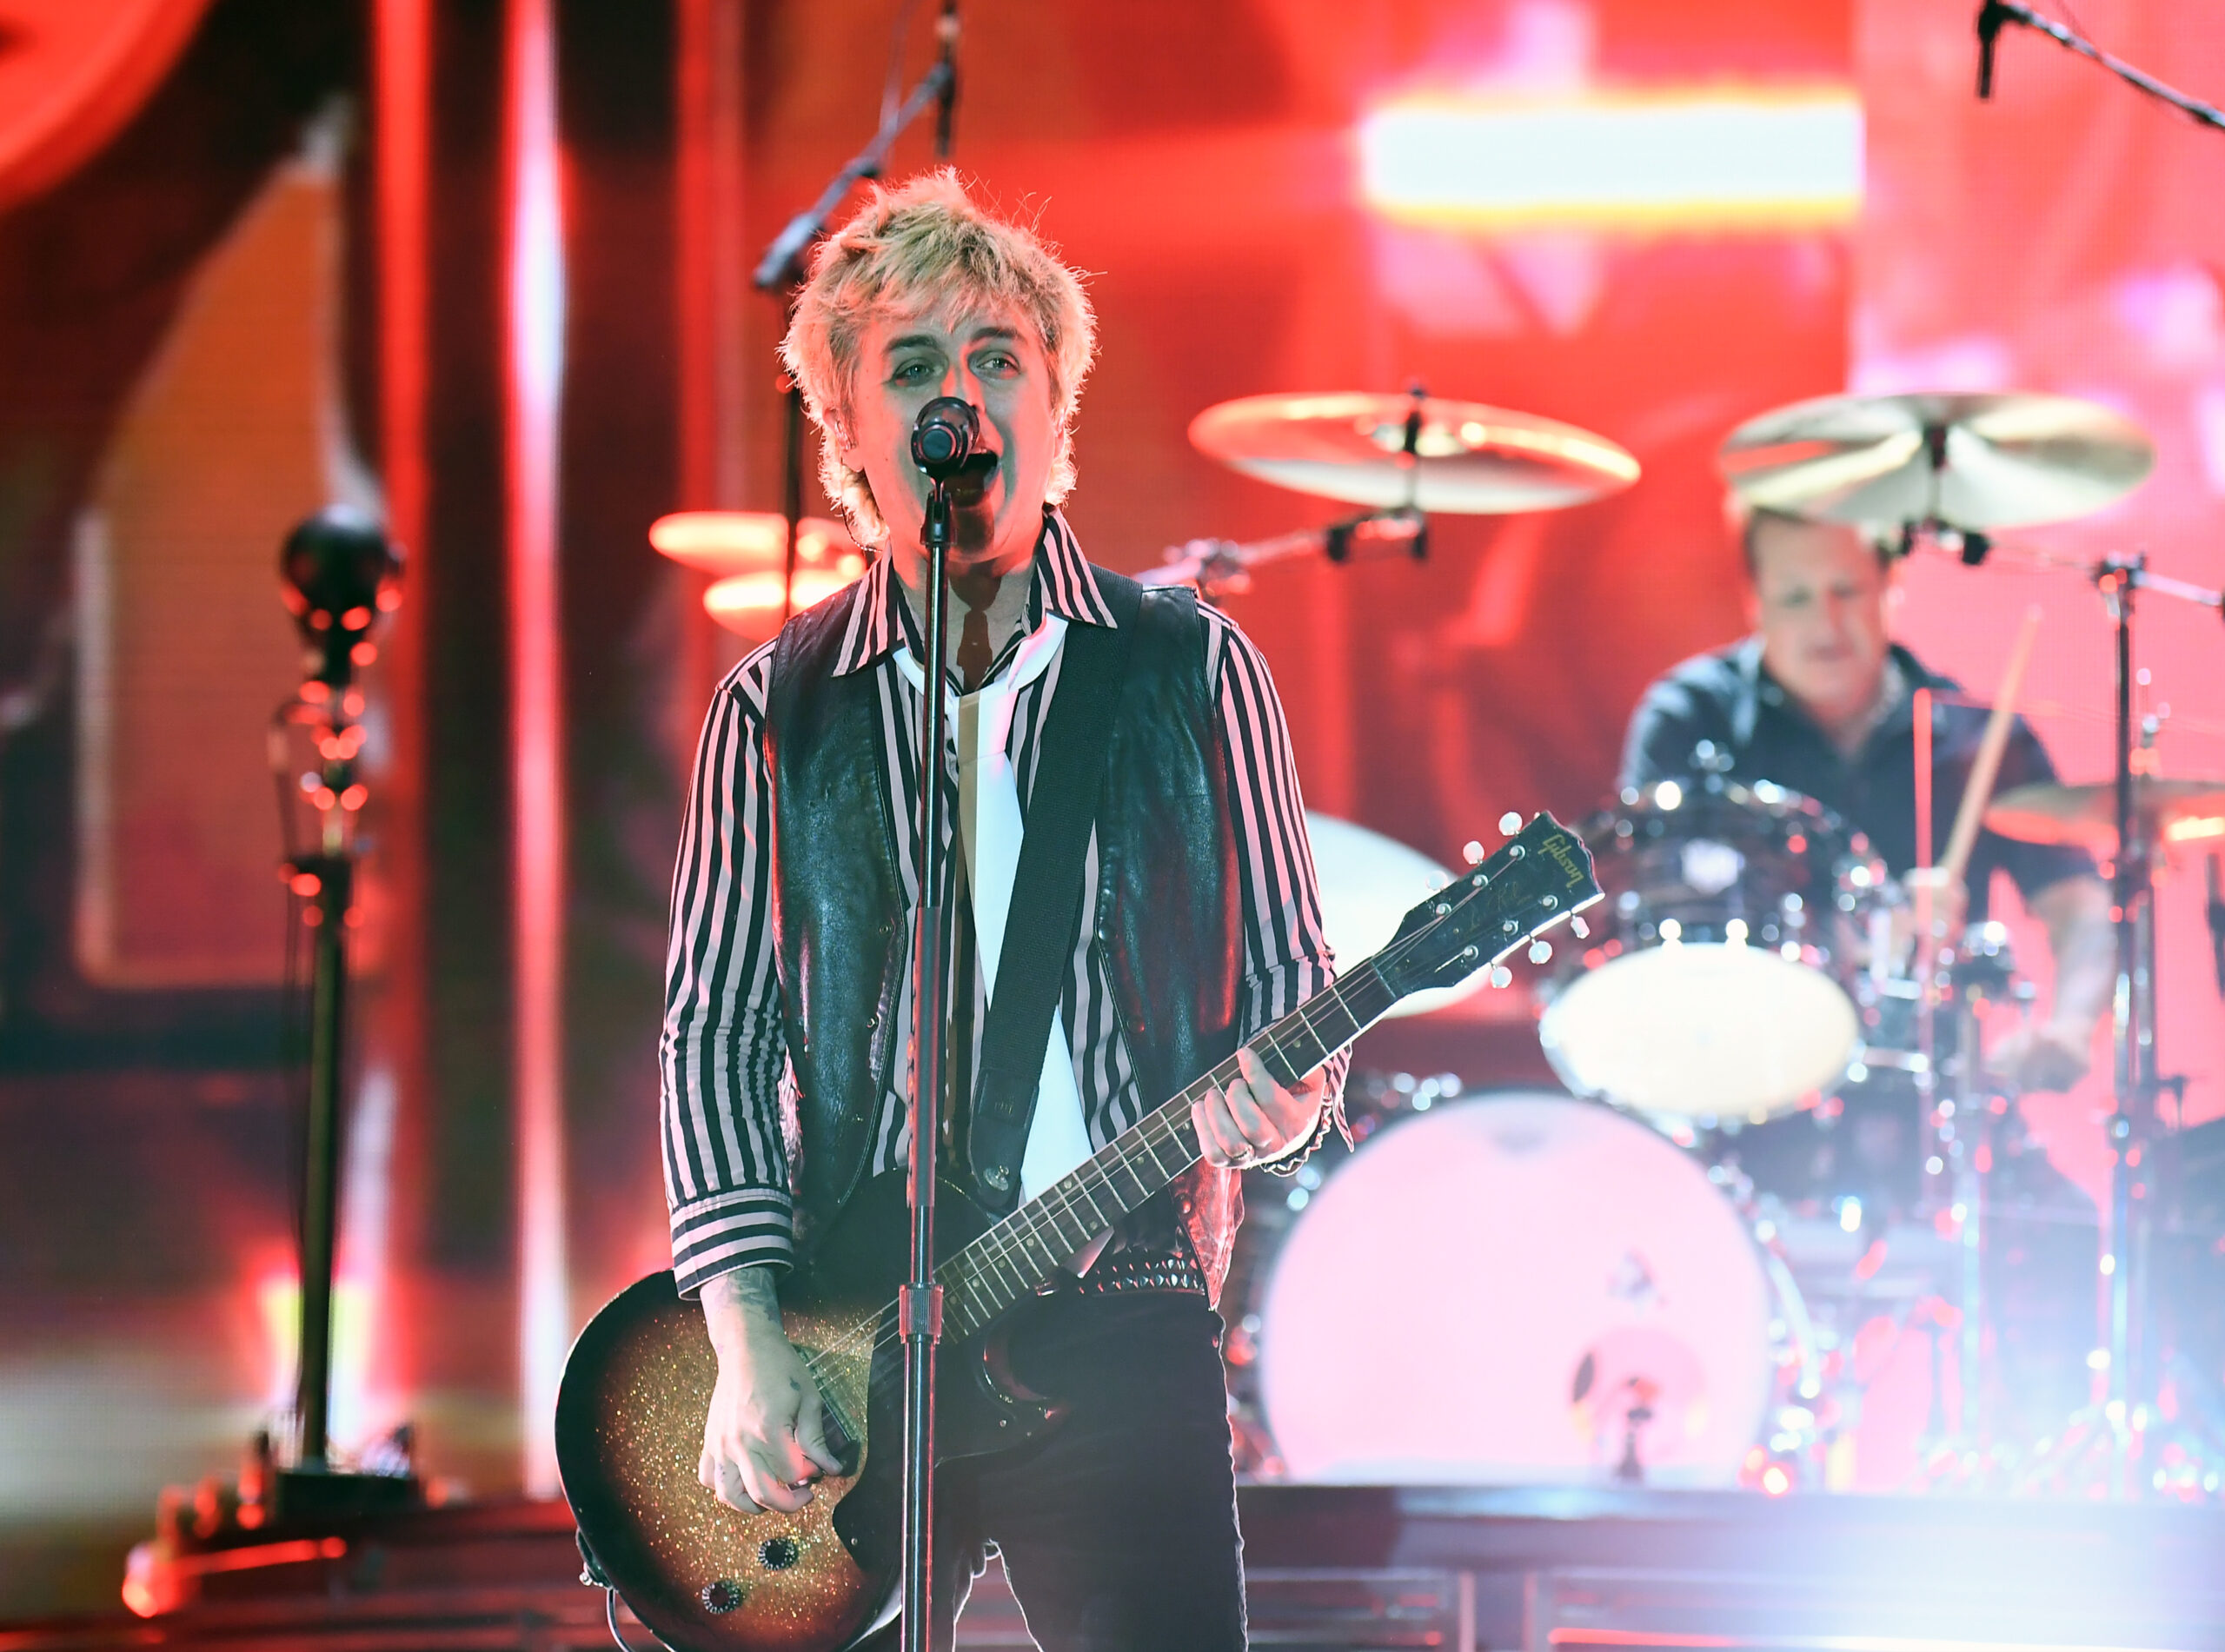 Green Day live